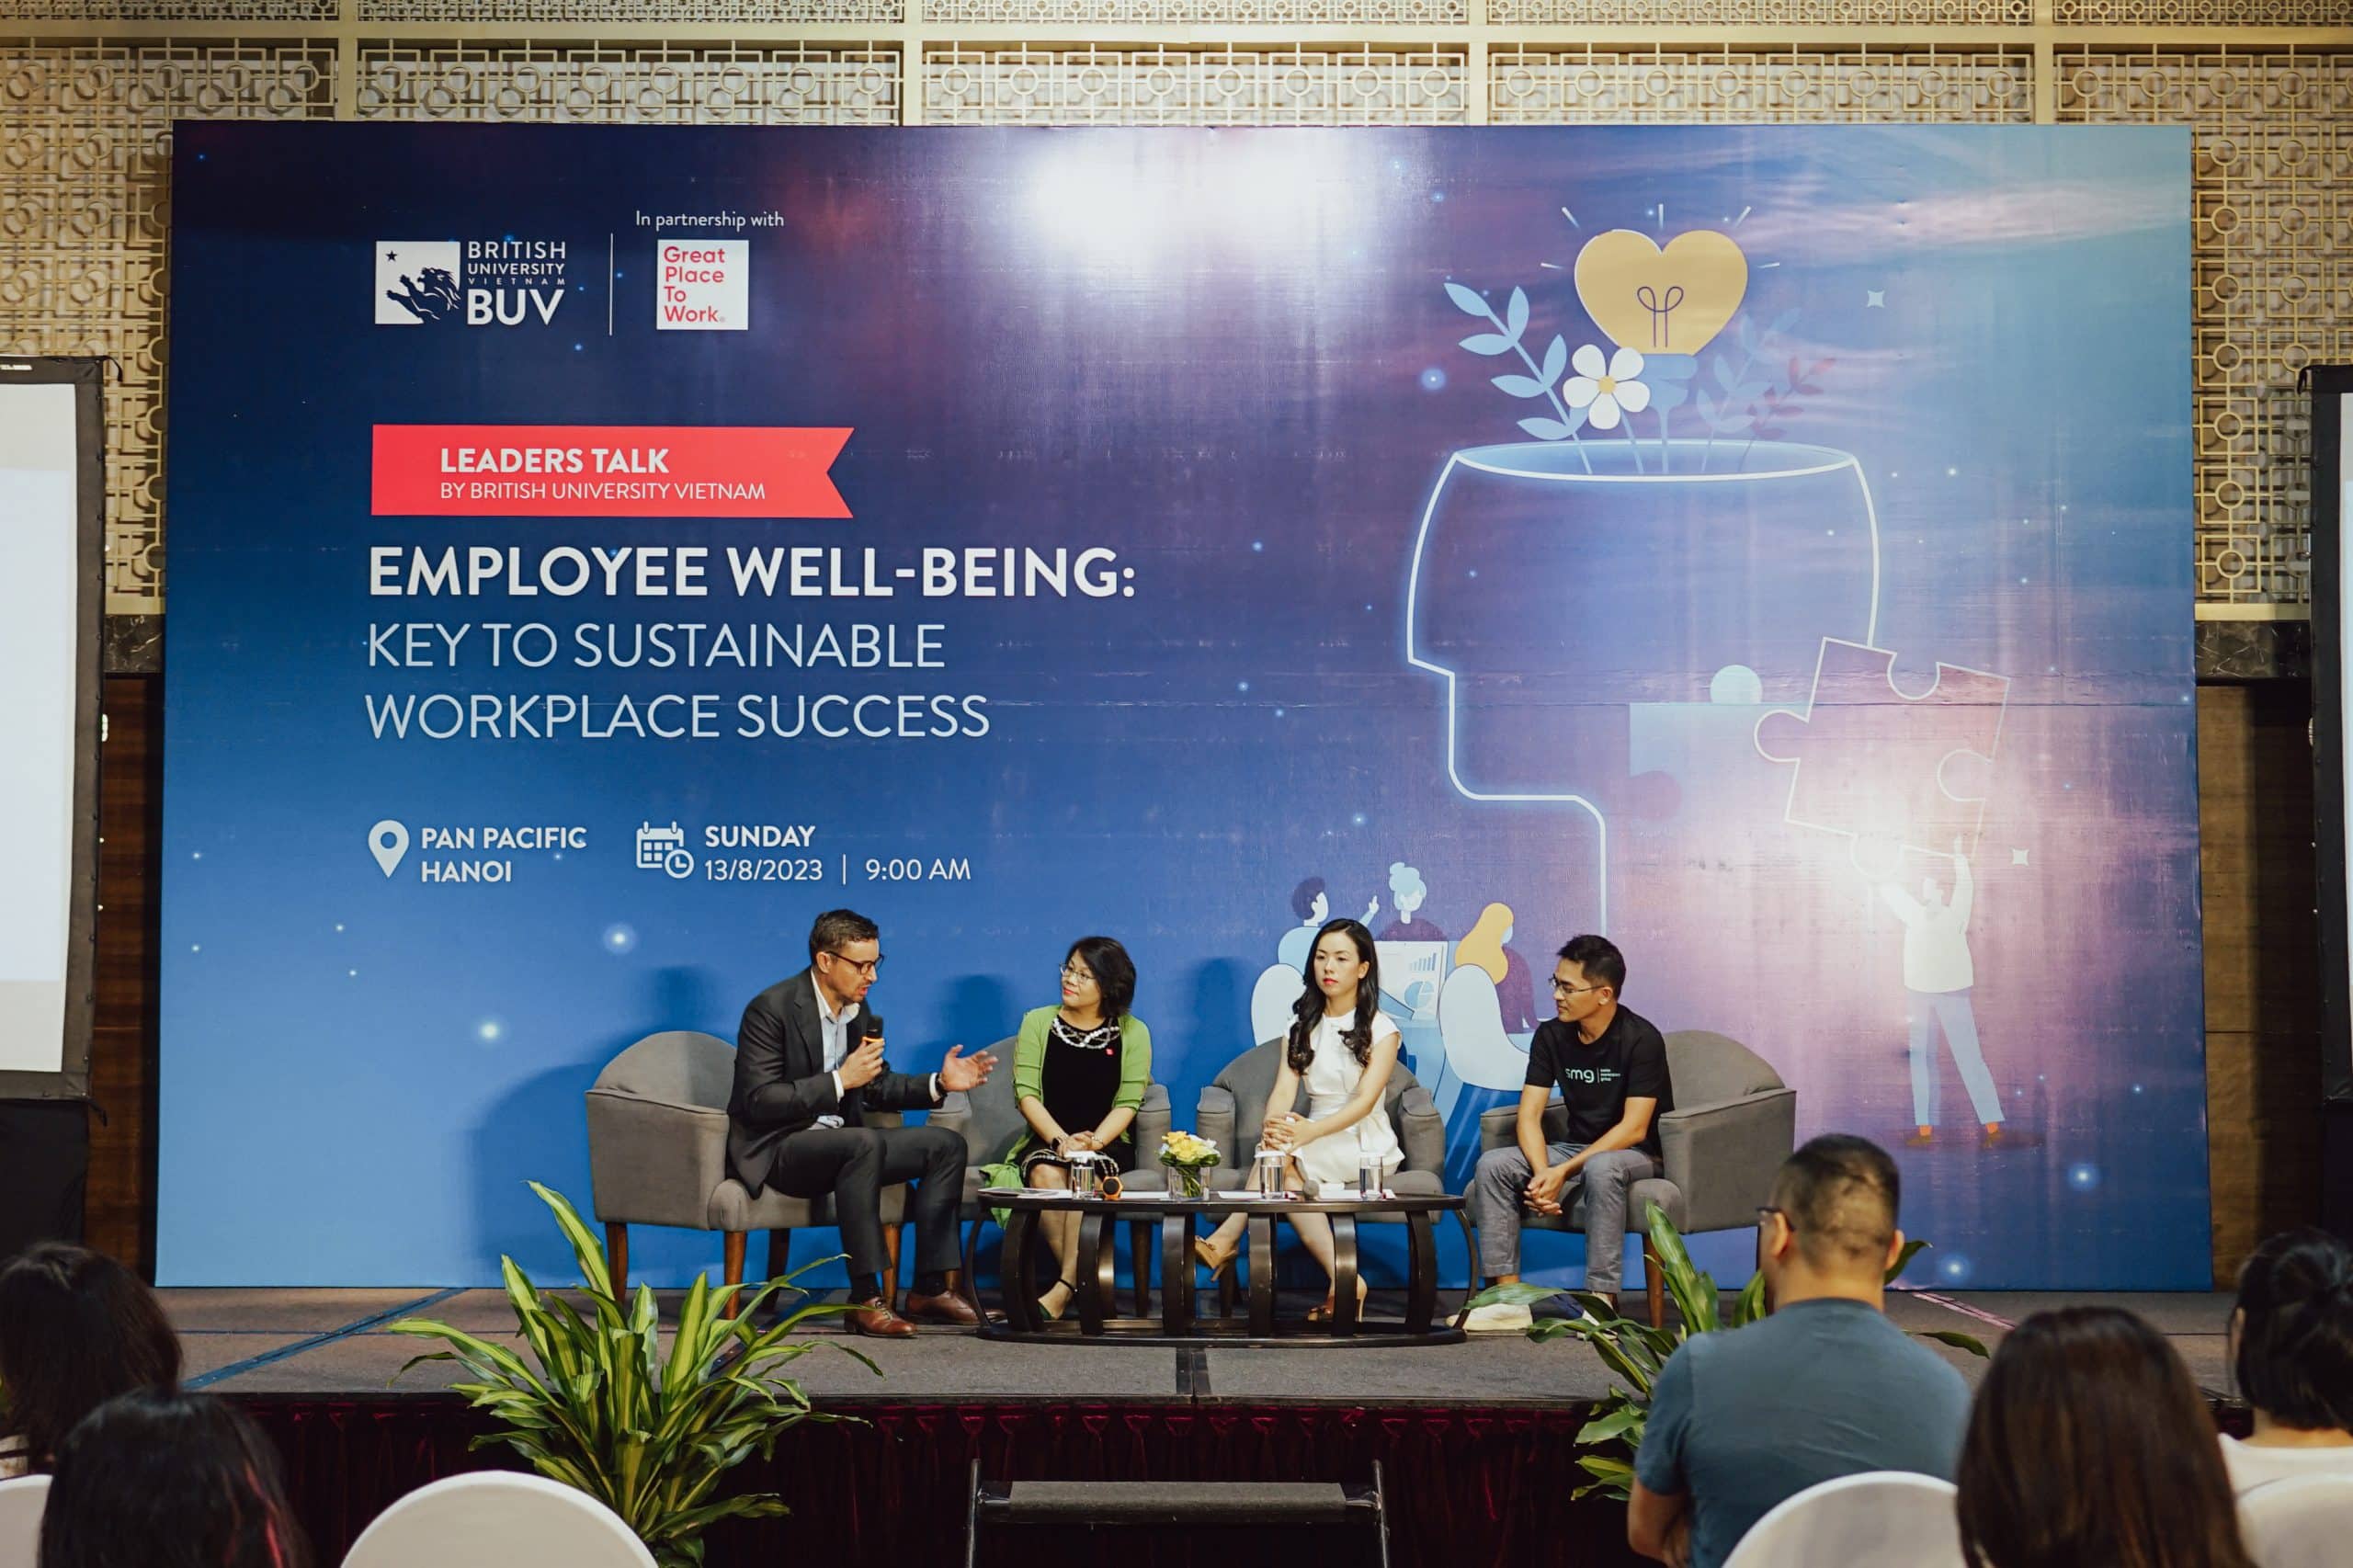 Fostering employee well-being: There’s no one-size-fits-all formula